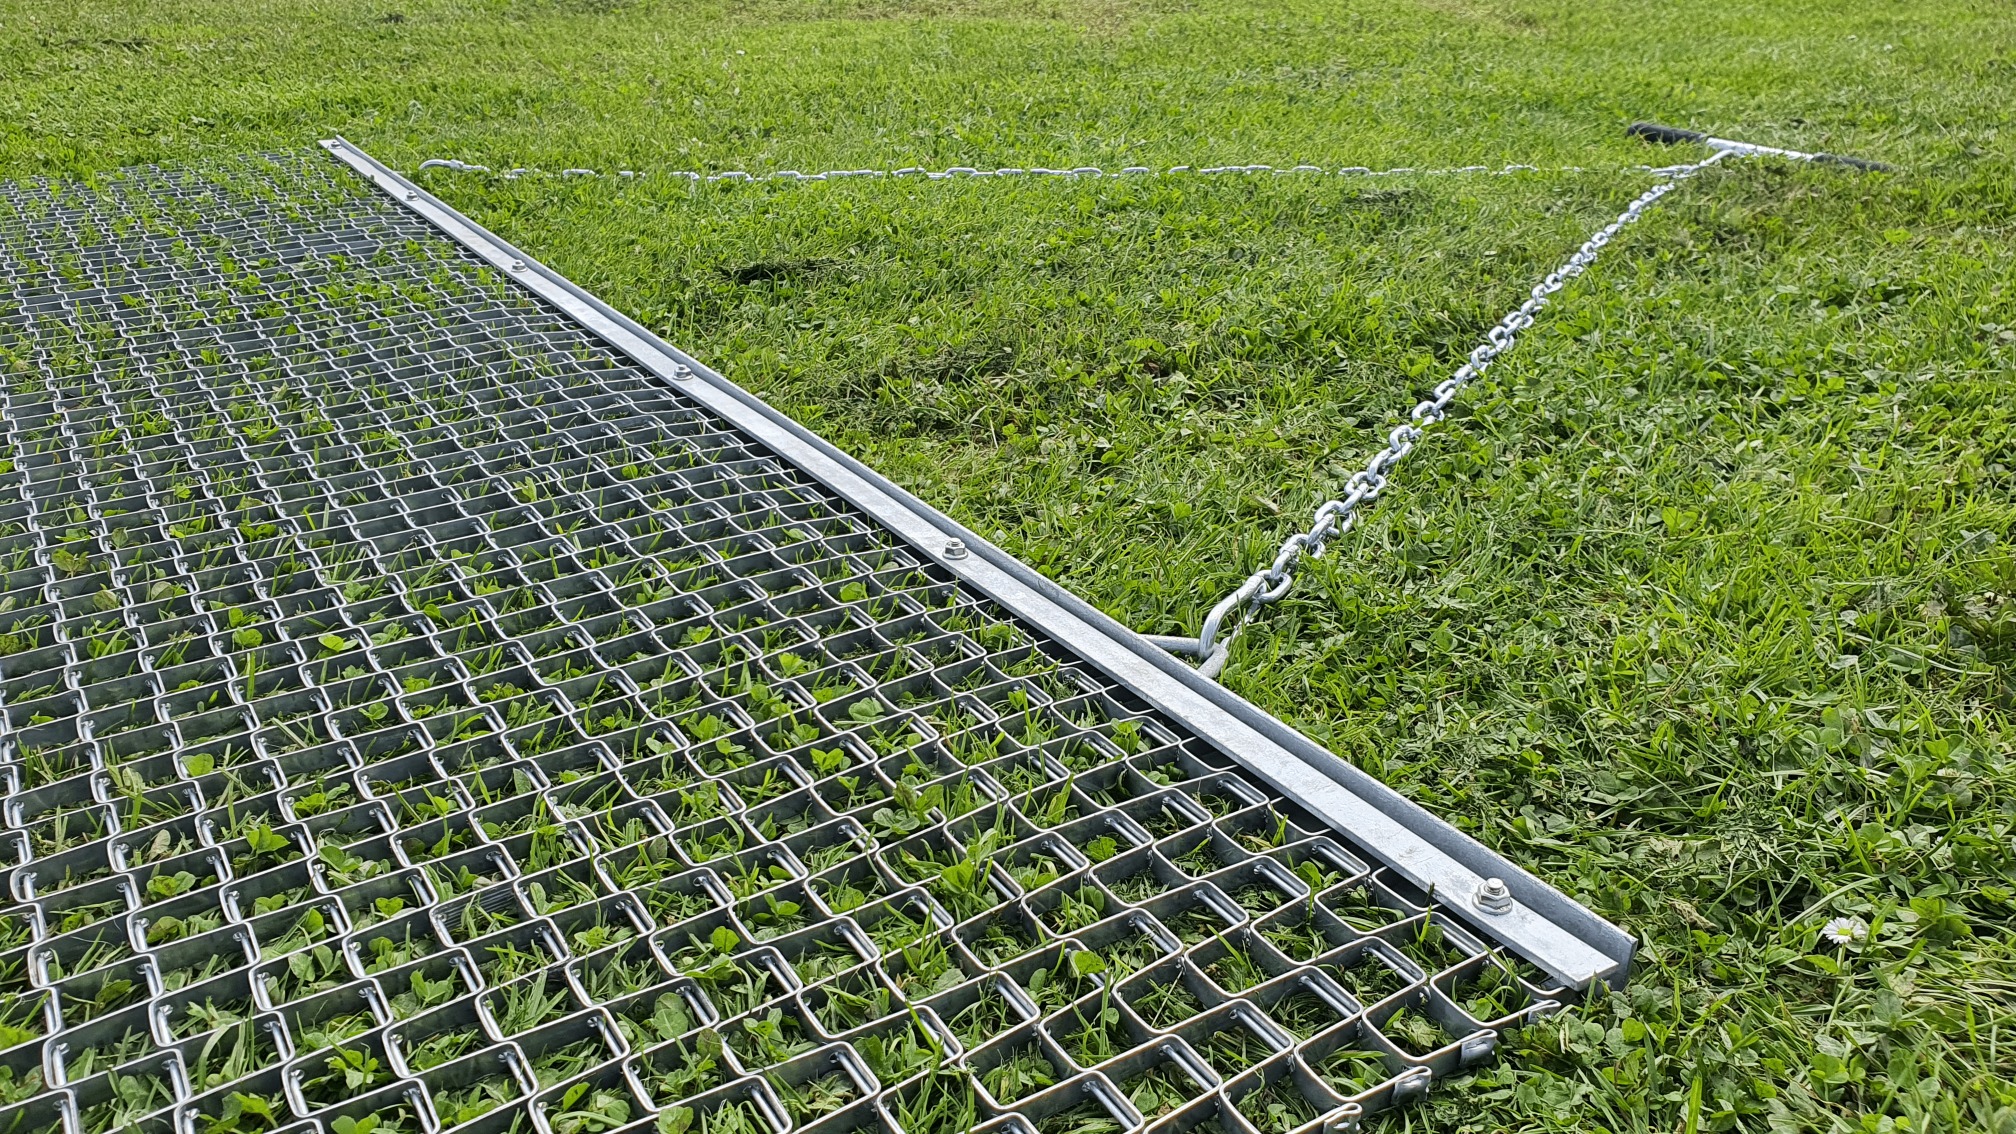 Galvanized Steel Drag Mat for Leveling Grass, Gravel, Clay, and Sand (3' x 6')